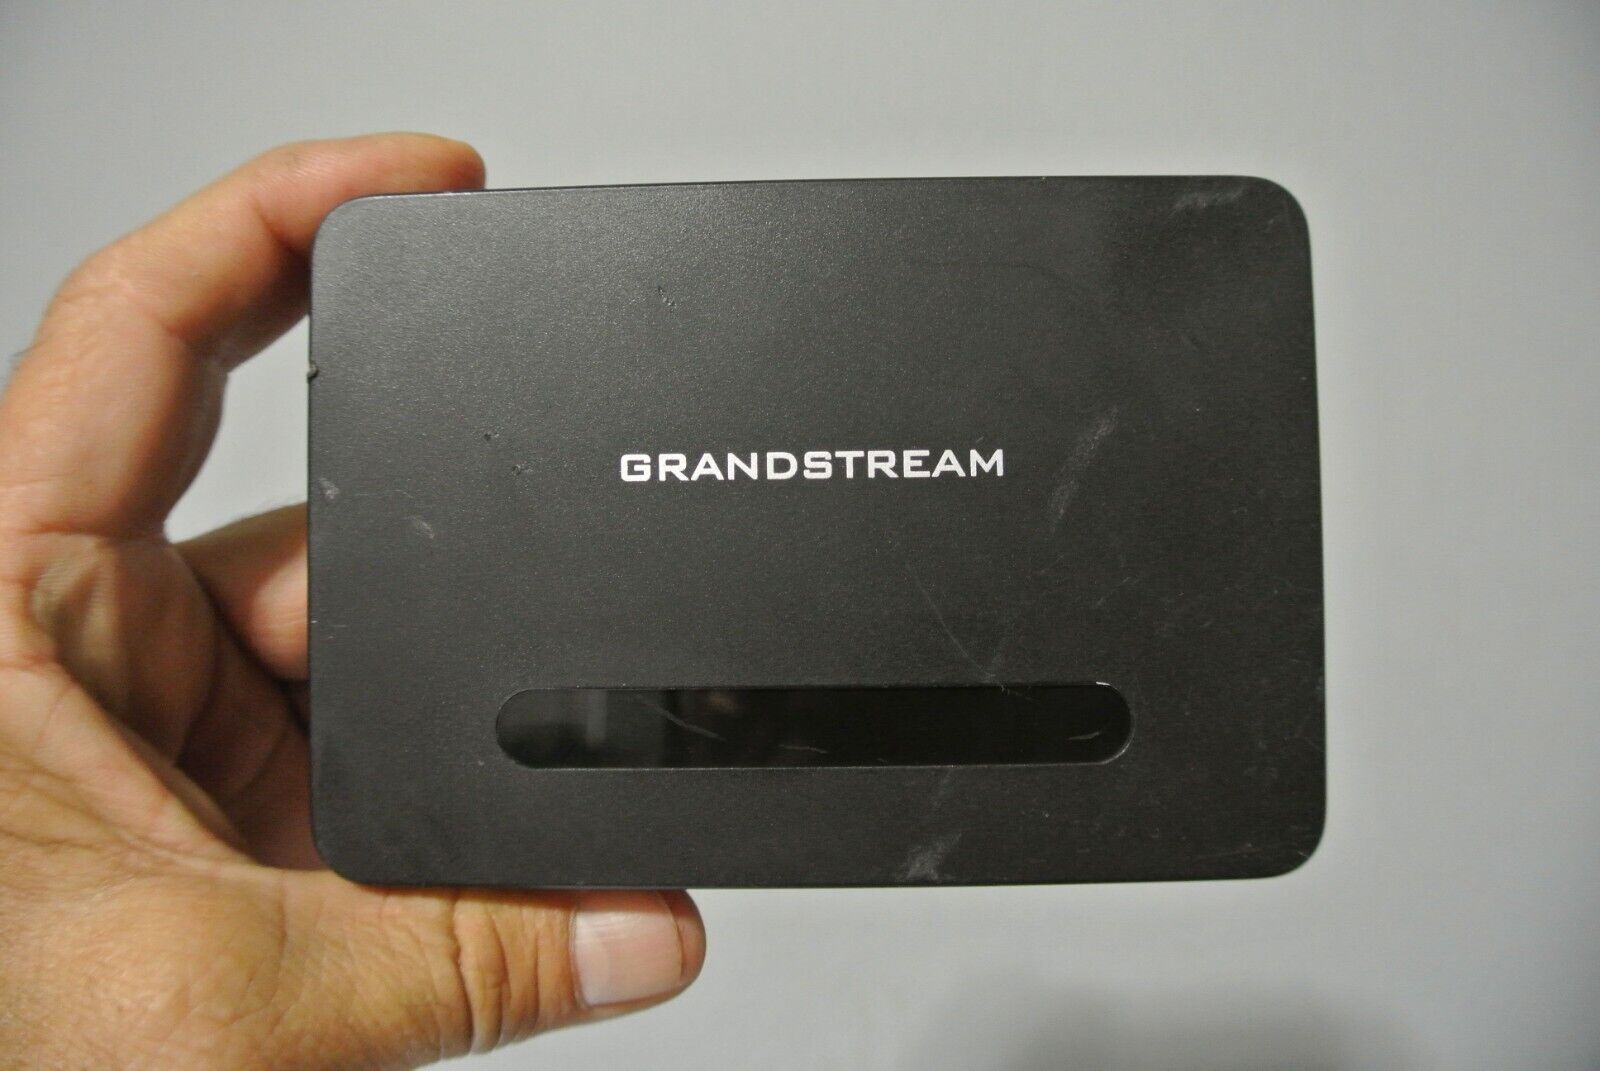 Grandstream DP750 DECT VoIP Base Station Pair up to 5 DP720's